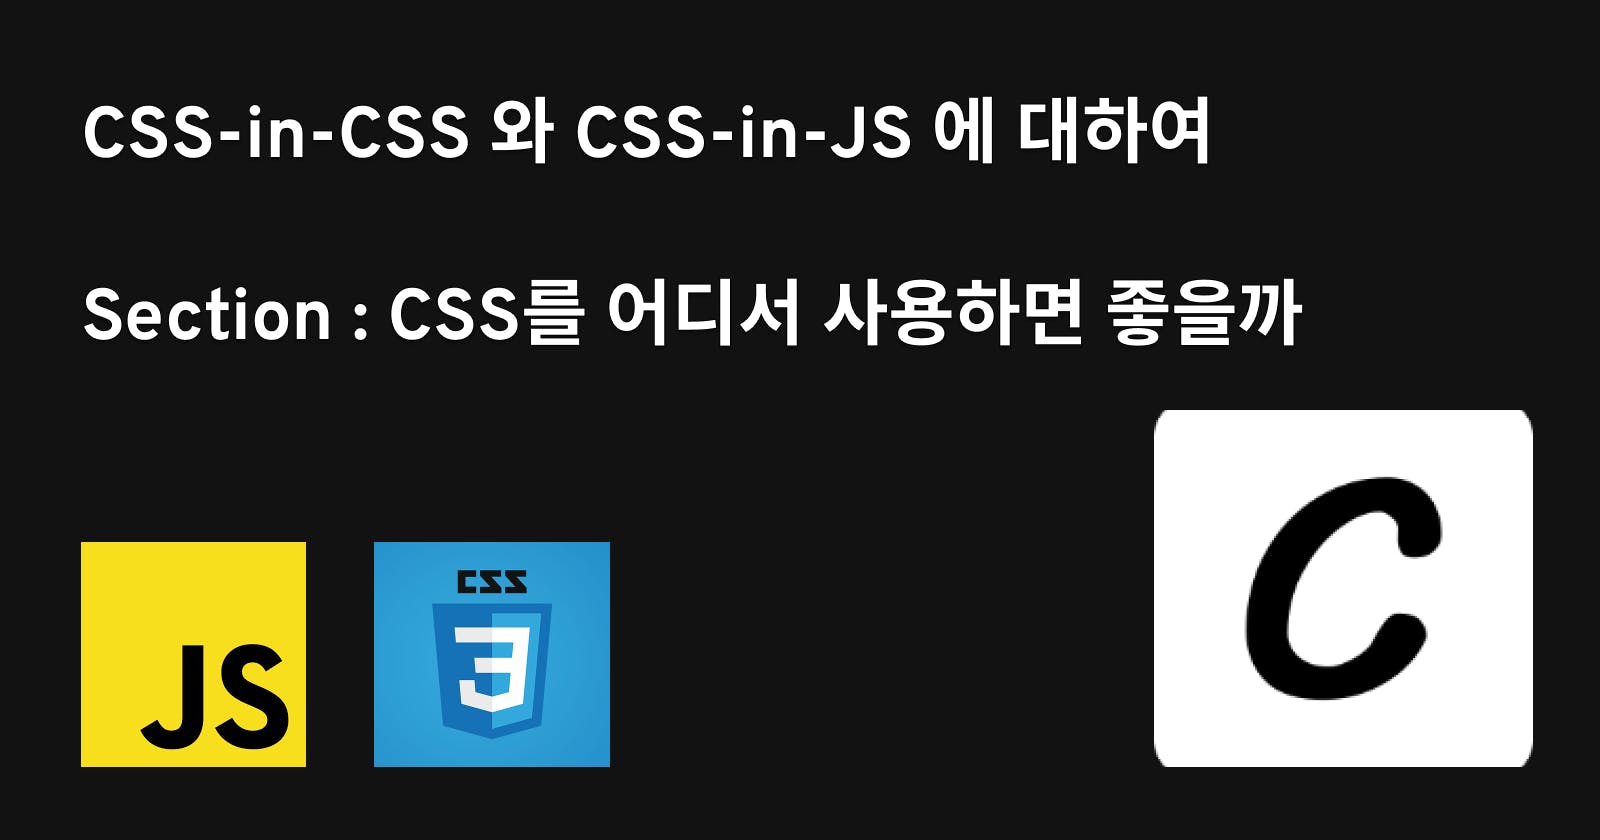 CSS-in-CSS 와 CSS-in-JS 에 대하여